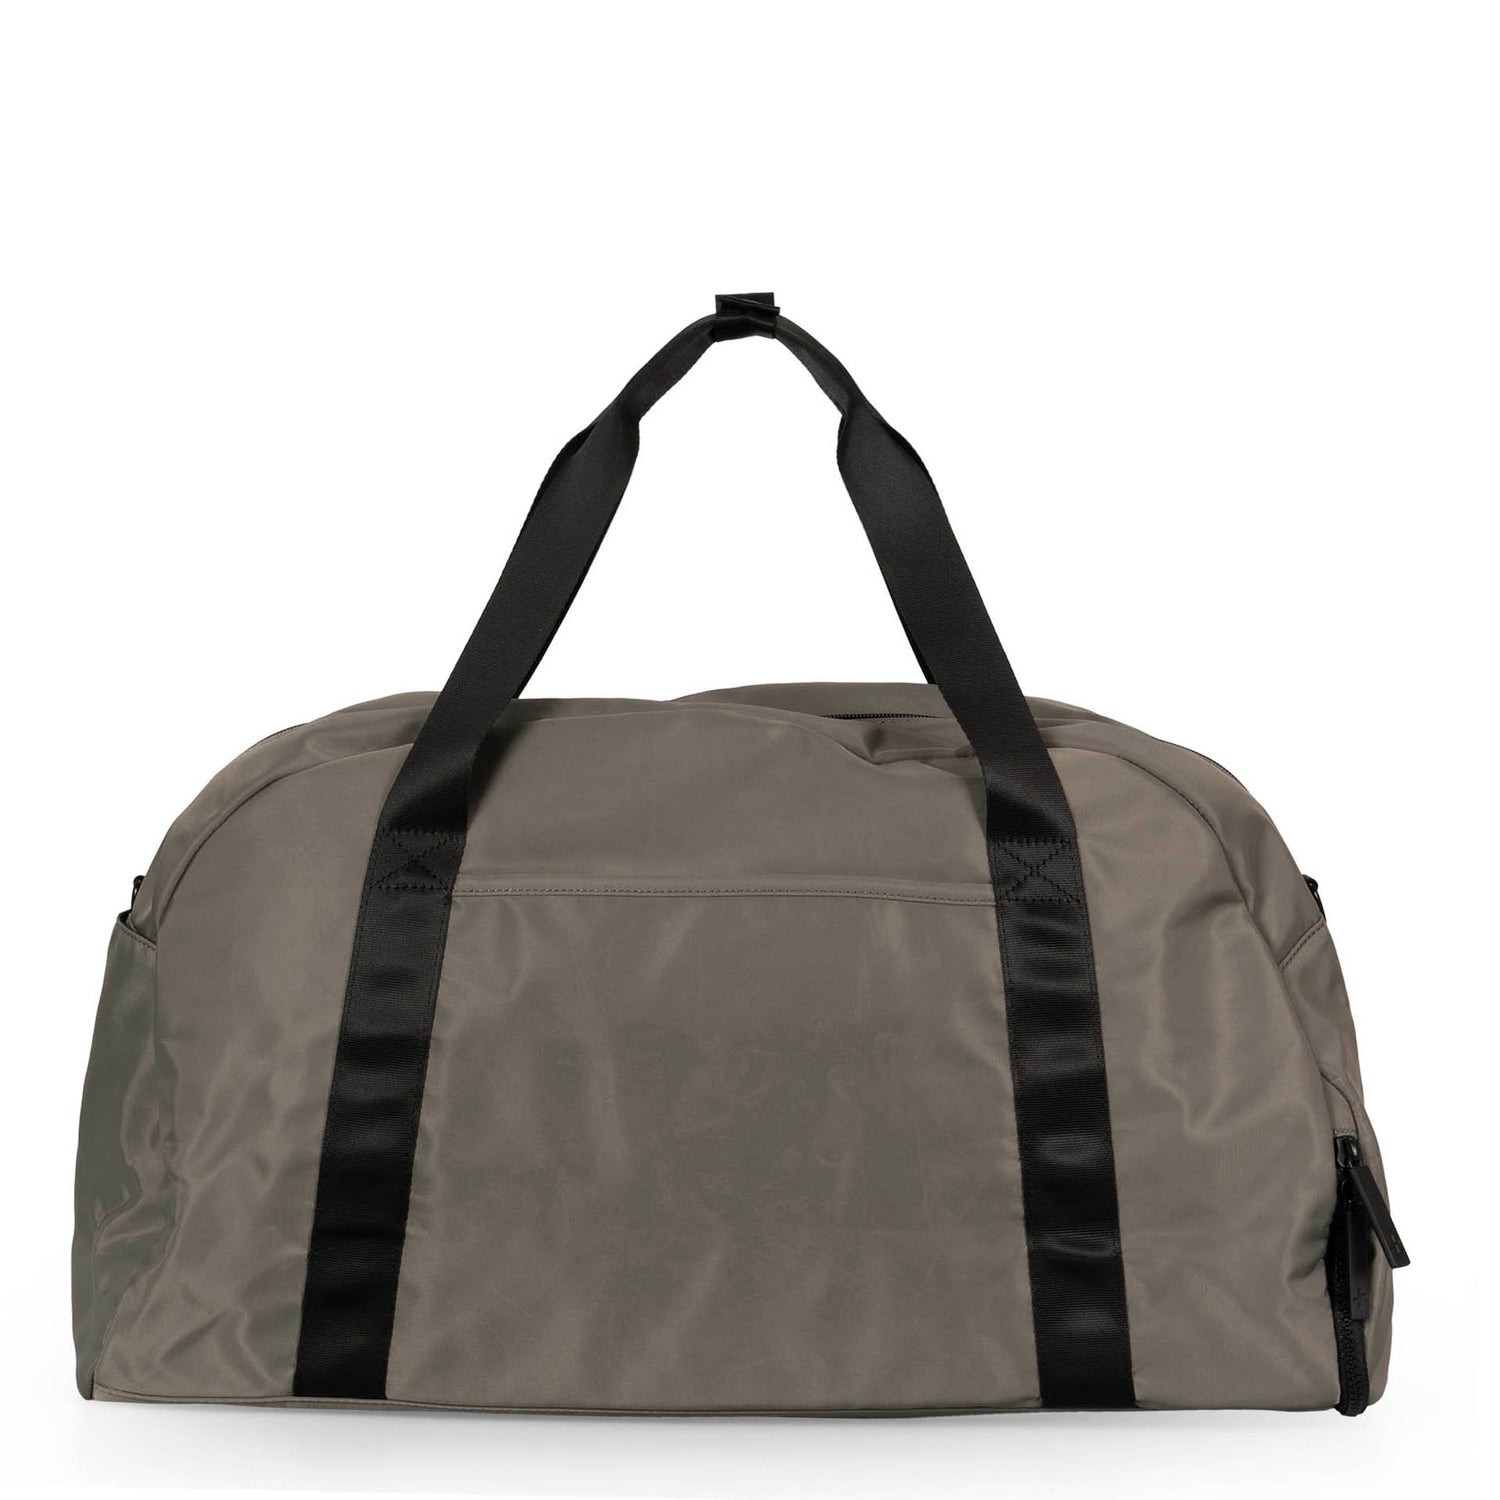 Back side of a grey-green duffle bag called Sutton designed by Tracker on a white background, showcasing its top handle and the bottom of a shoe compartment.